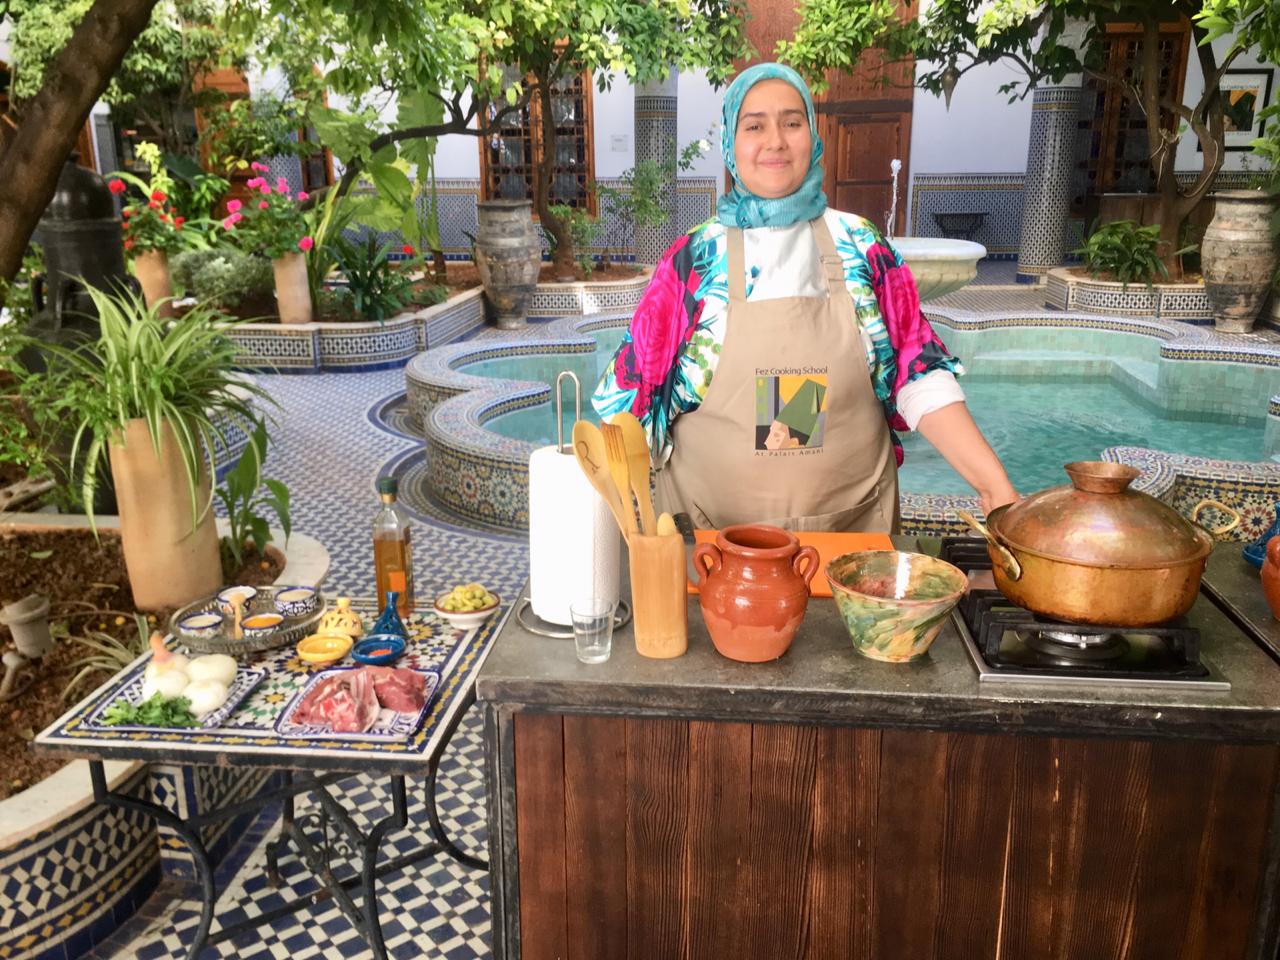 Wafae the chef at Fez Cooking School